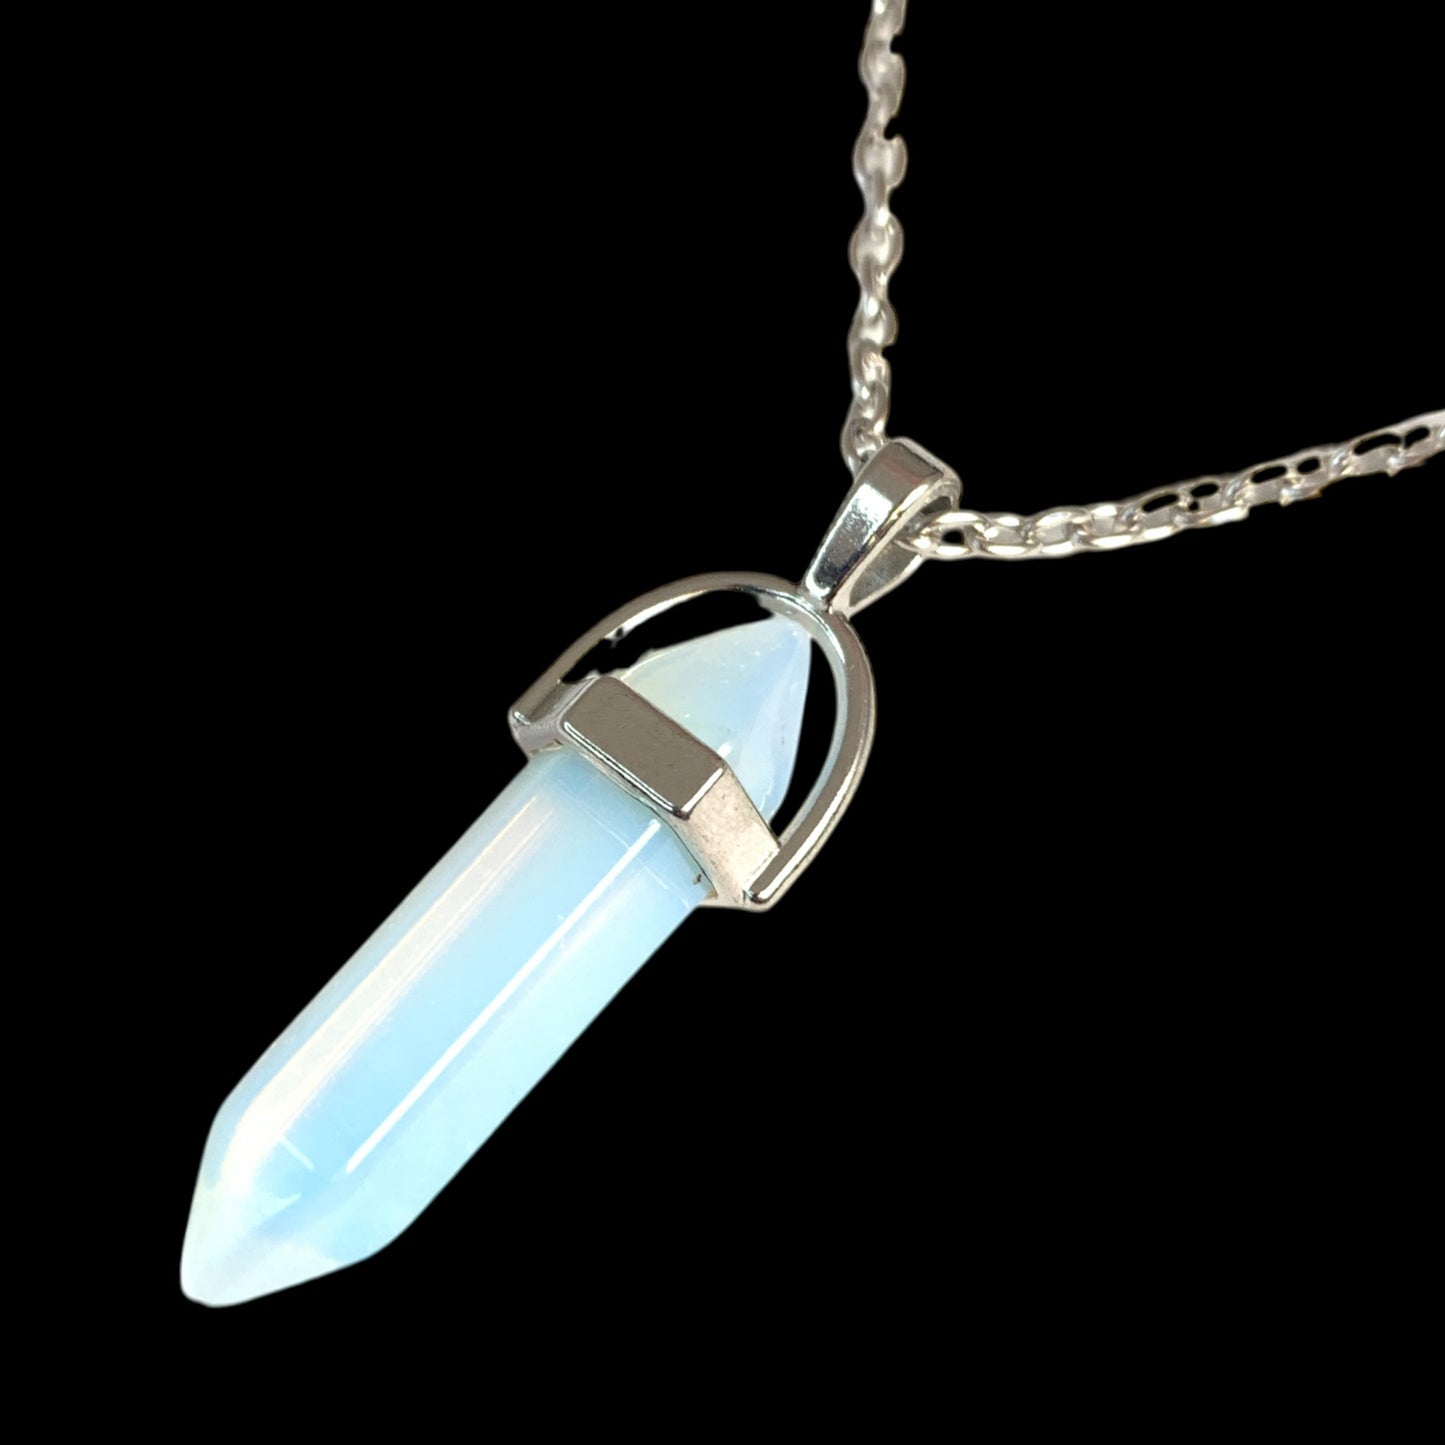 Opalite Double Terminated Pendulum Stone Pendant 13x35mm with 18 Inch Chain 2 lnch Extender Chain - China - NEW922